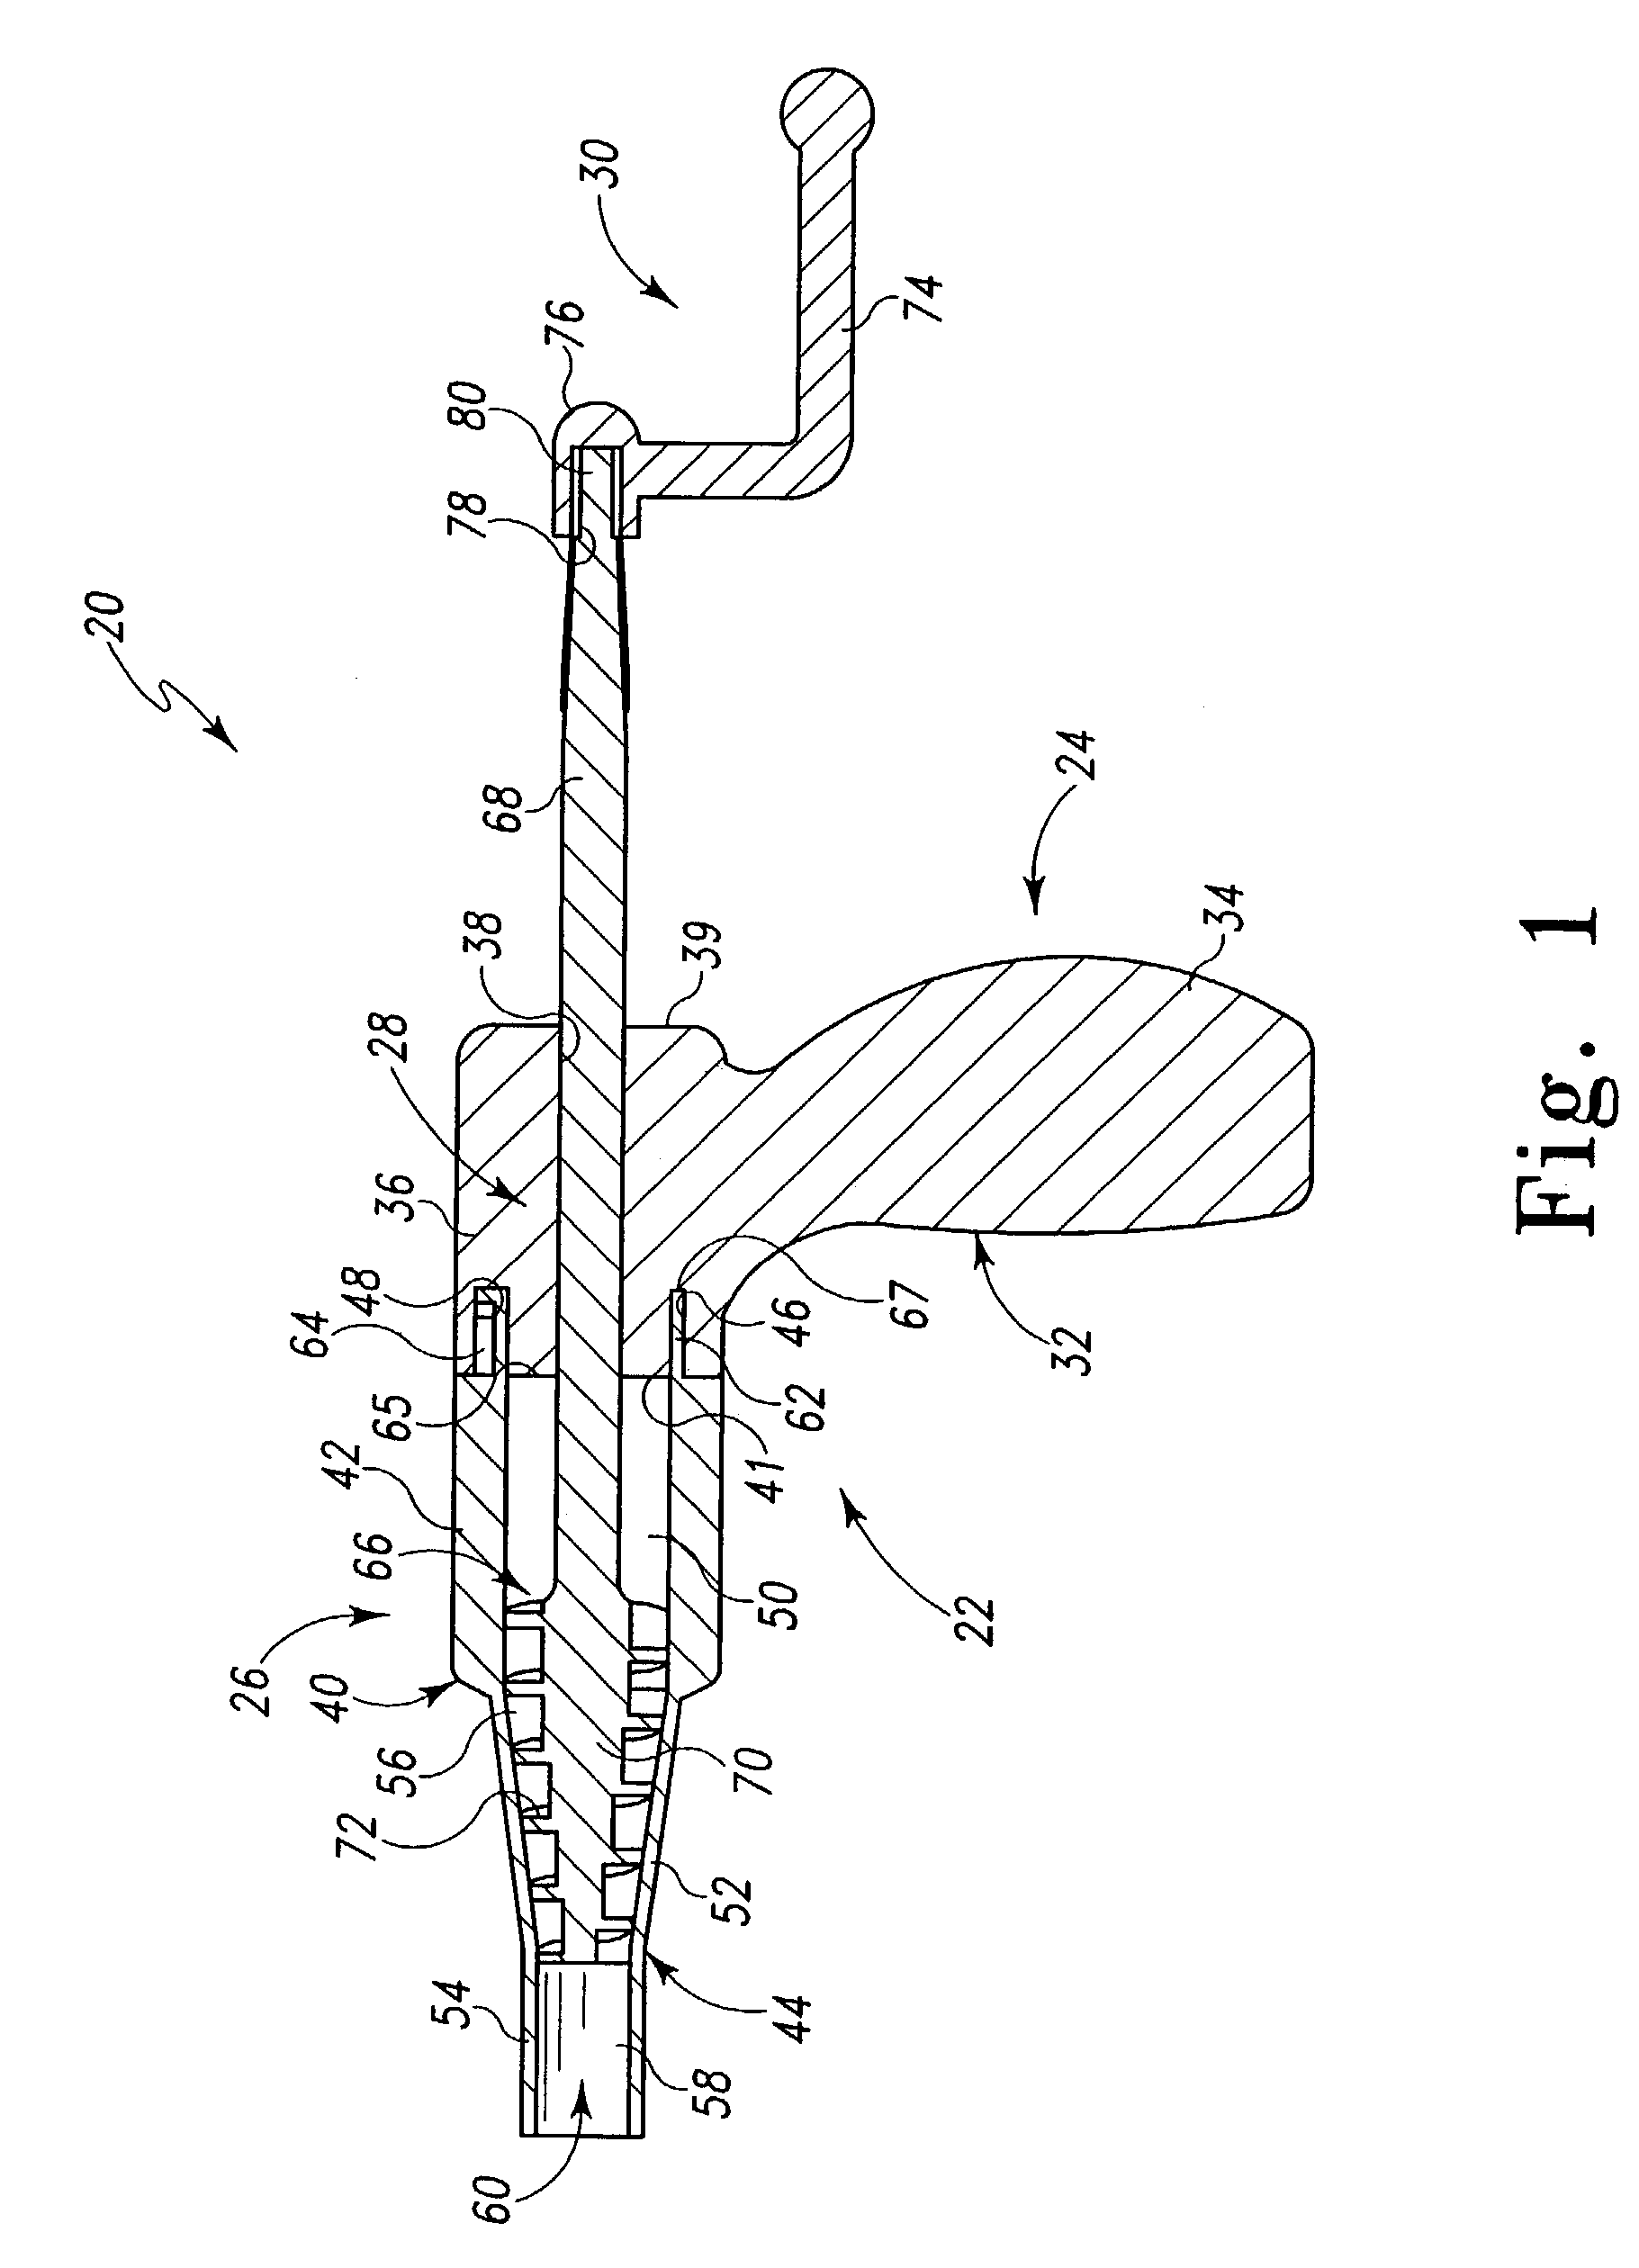 Bone graft delivery device and method of use